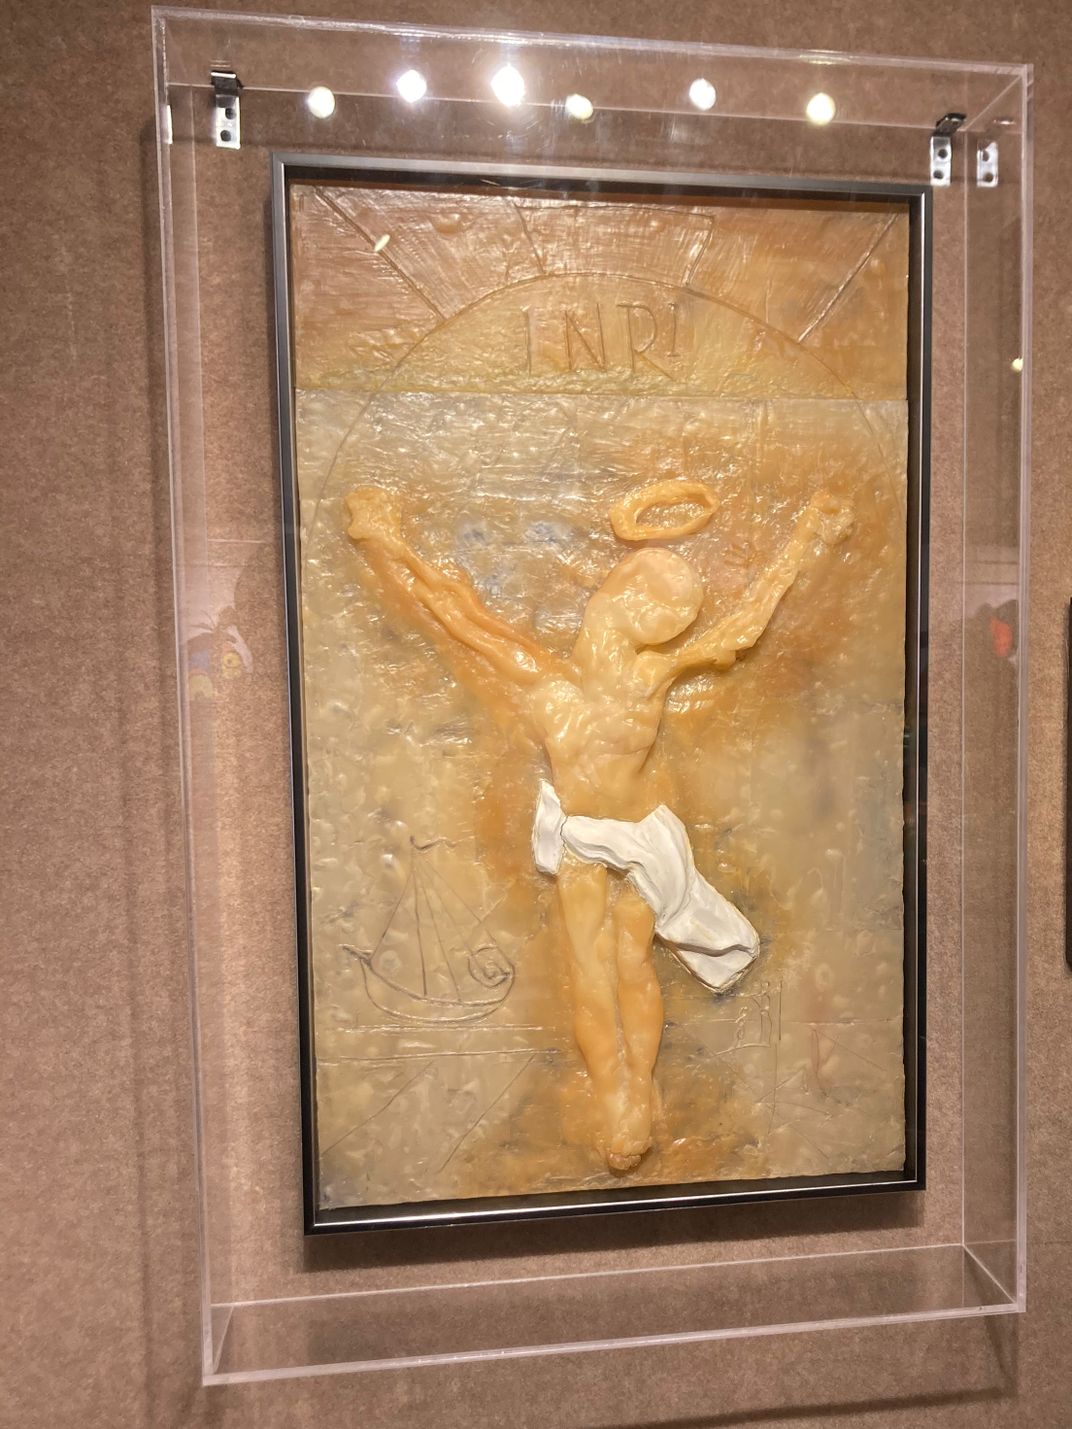 The "Lost Wax" is on display at Harte International Galleries in Maui.